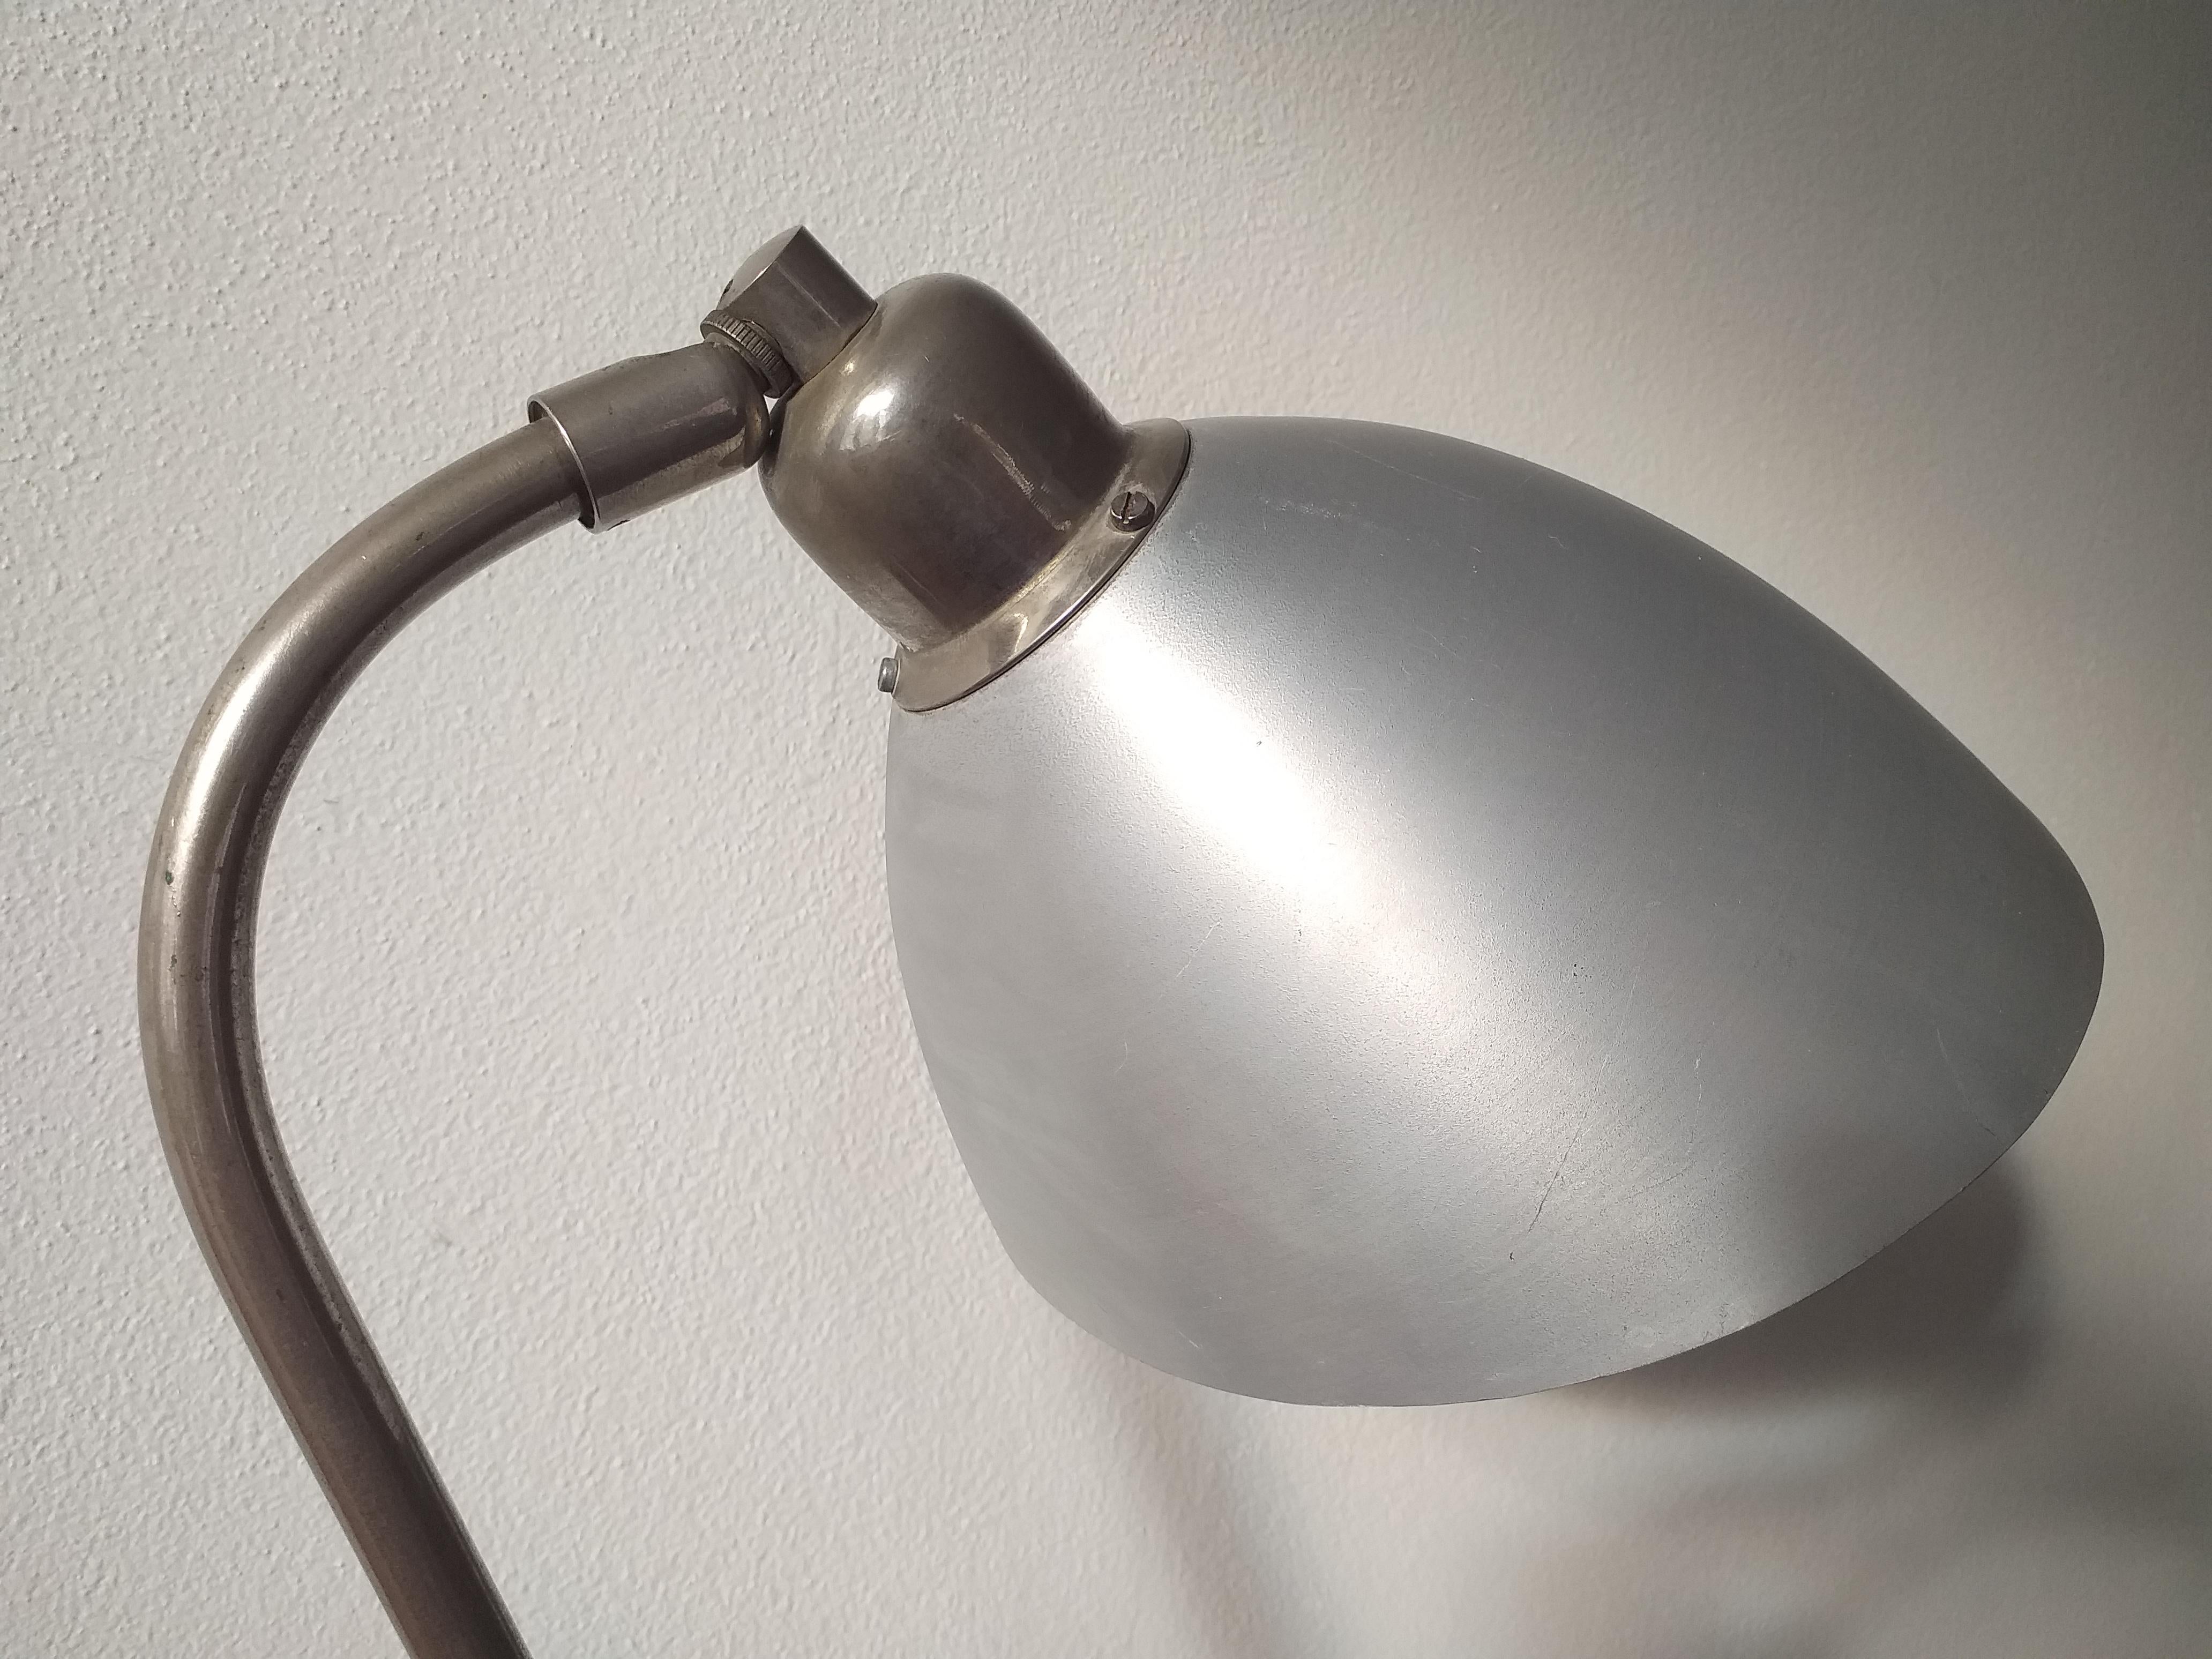 Czech Functionalism Table Lamp Designed by Franta Anyz, Bauhaus, 1930s